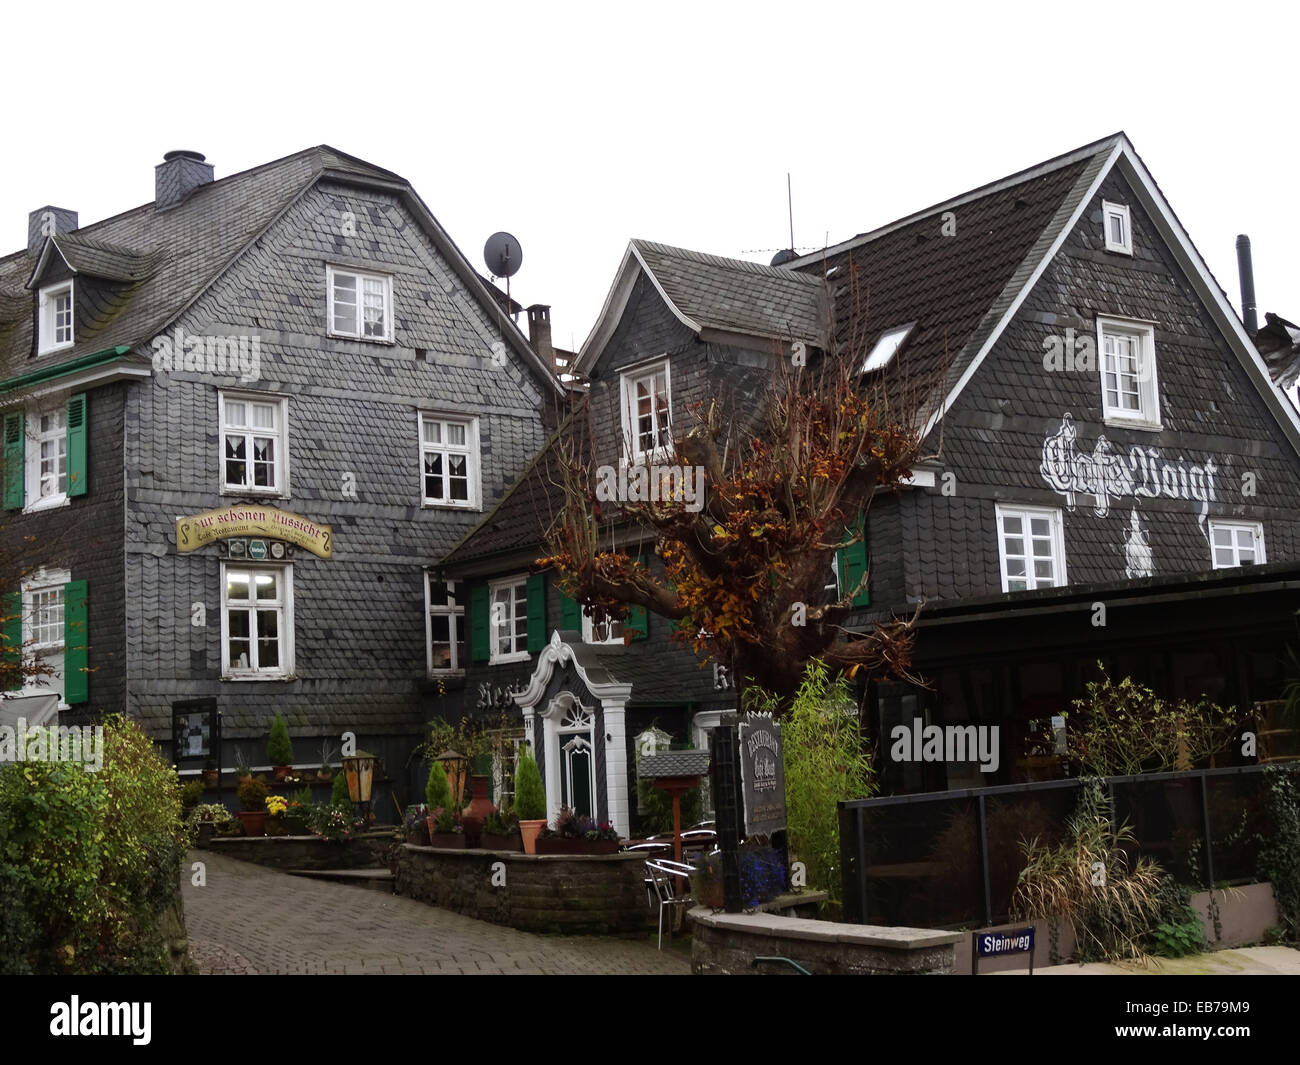 Slade Houses and Cafe Voigt in Burg ner the Wupper Photo 11/19/2014 Stock Photo